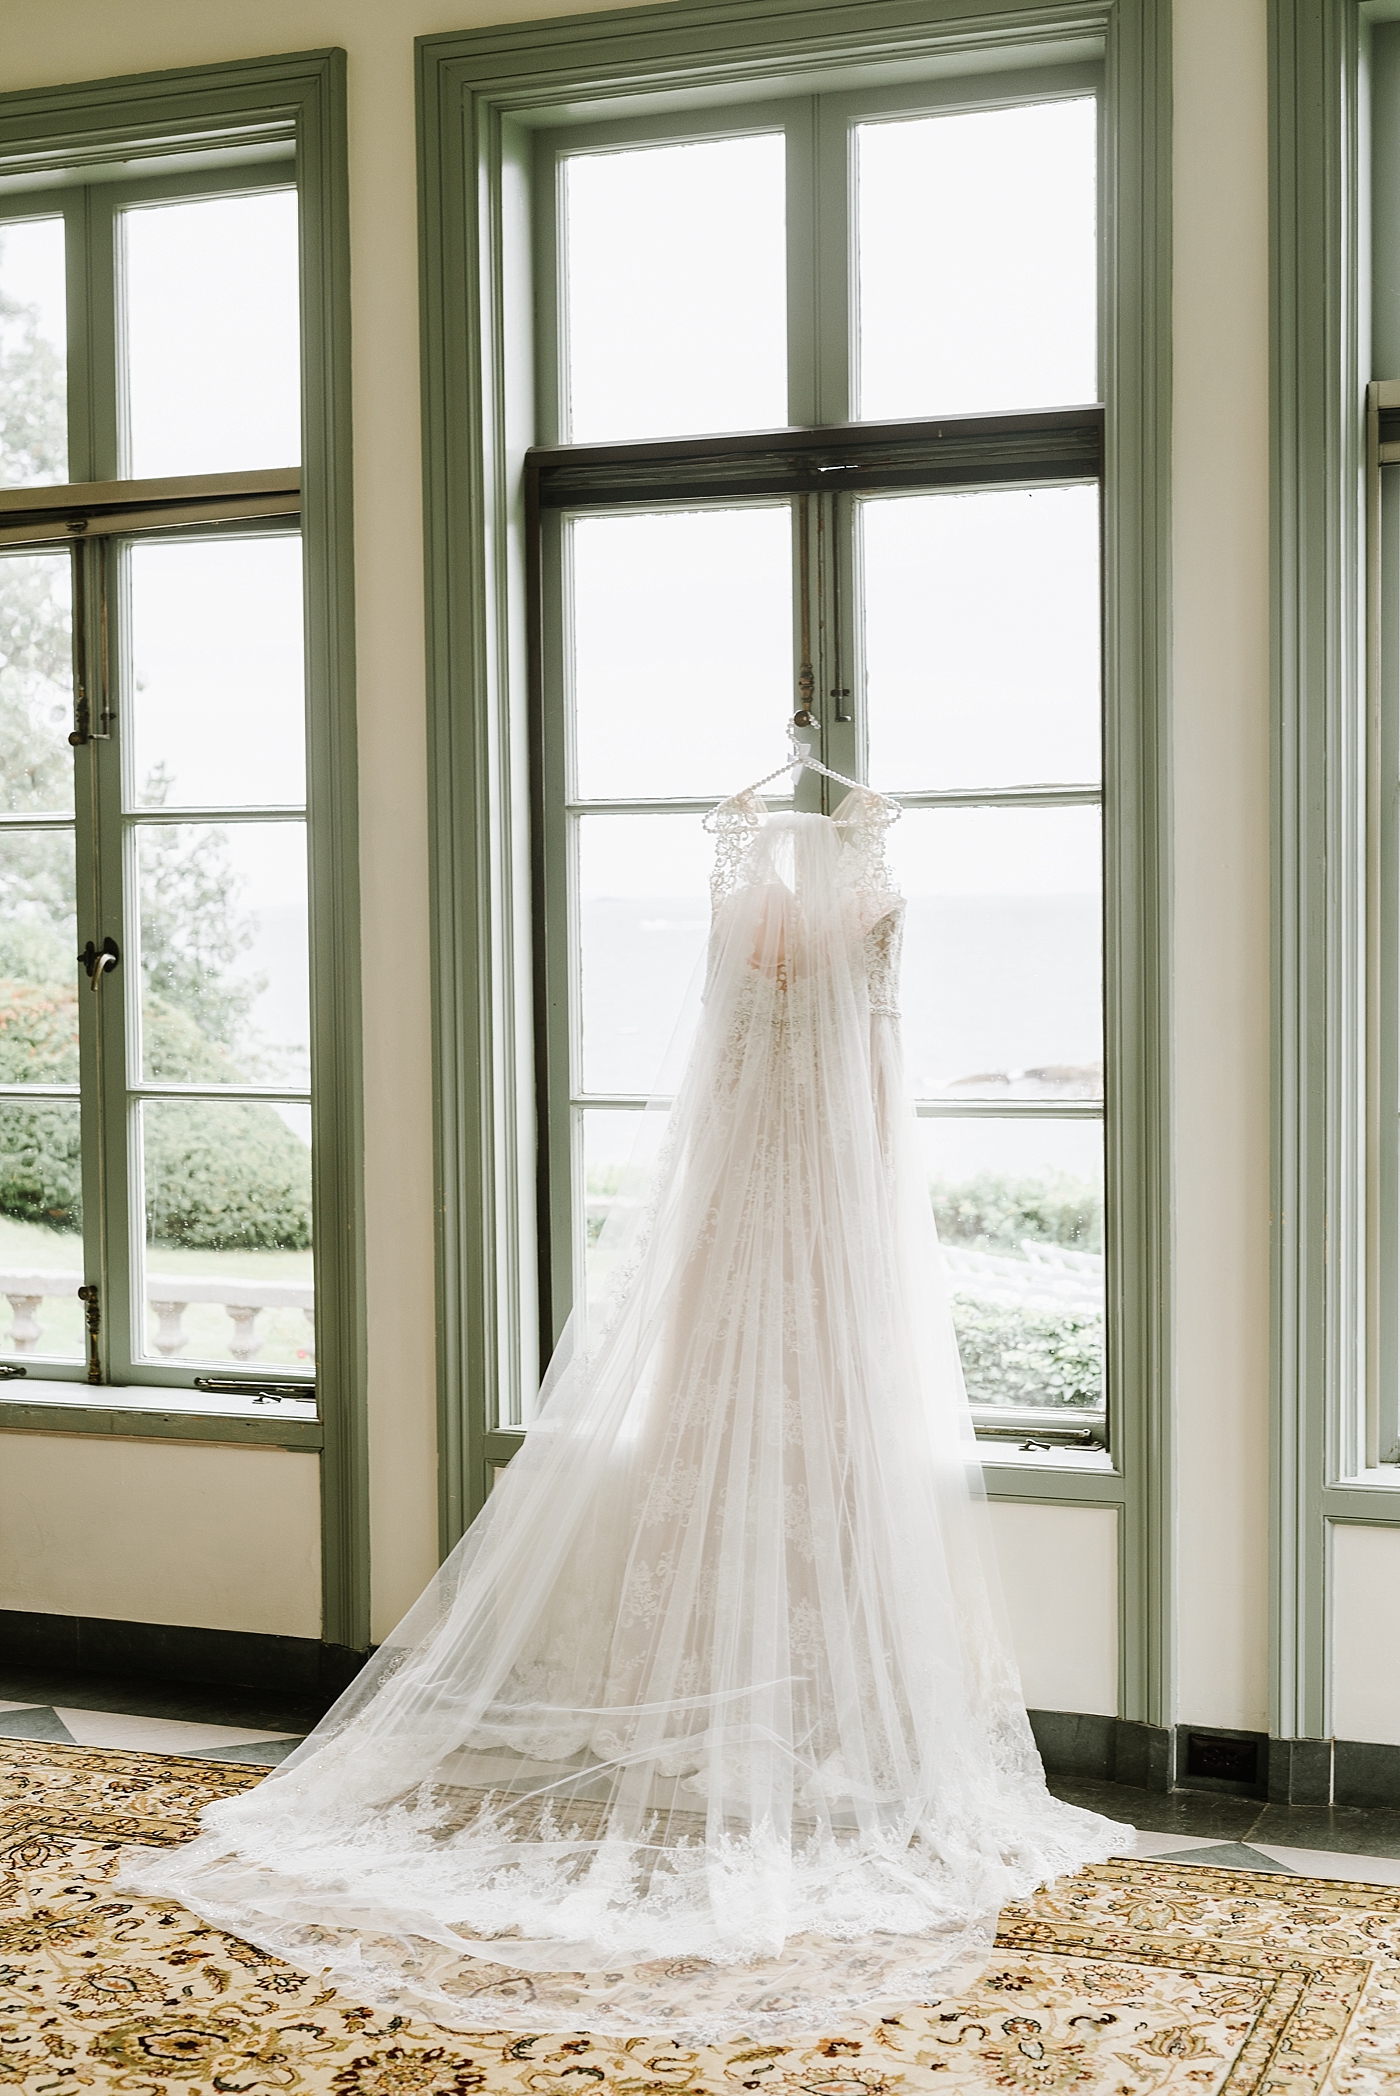 Rainy & Romantic Wedding at Misselwood at Endicott College in Beverly, MA by Boston Wedding Photographer Annmarie Swift